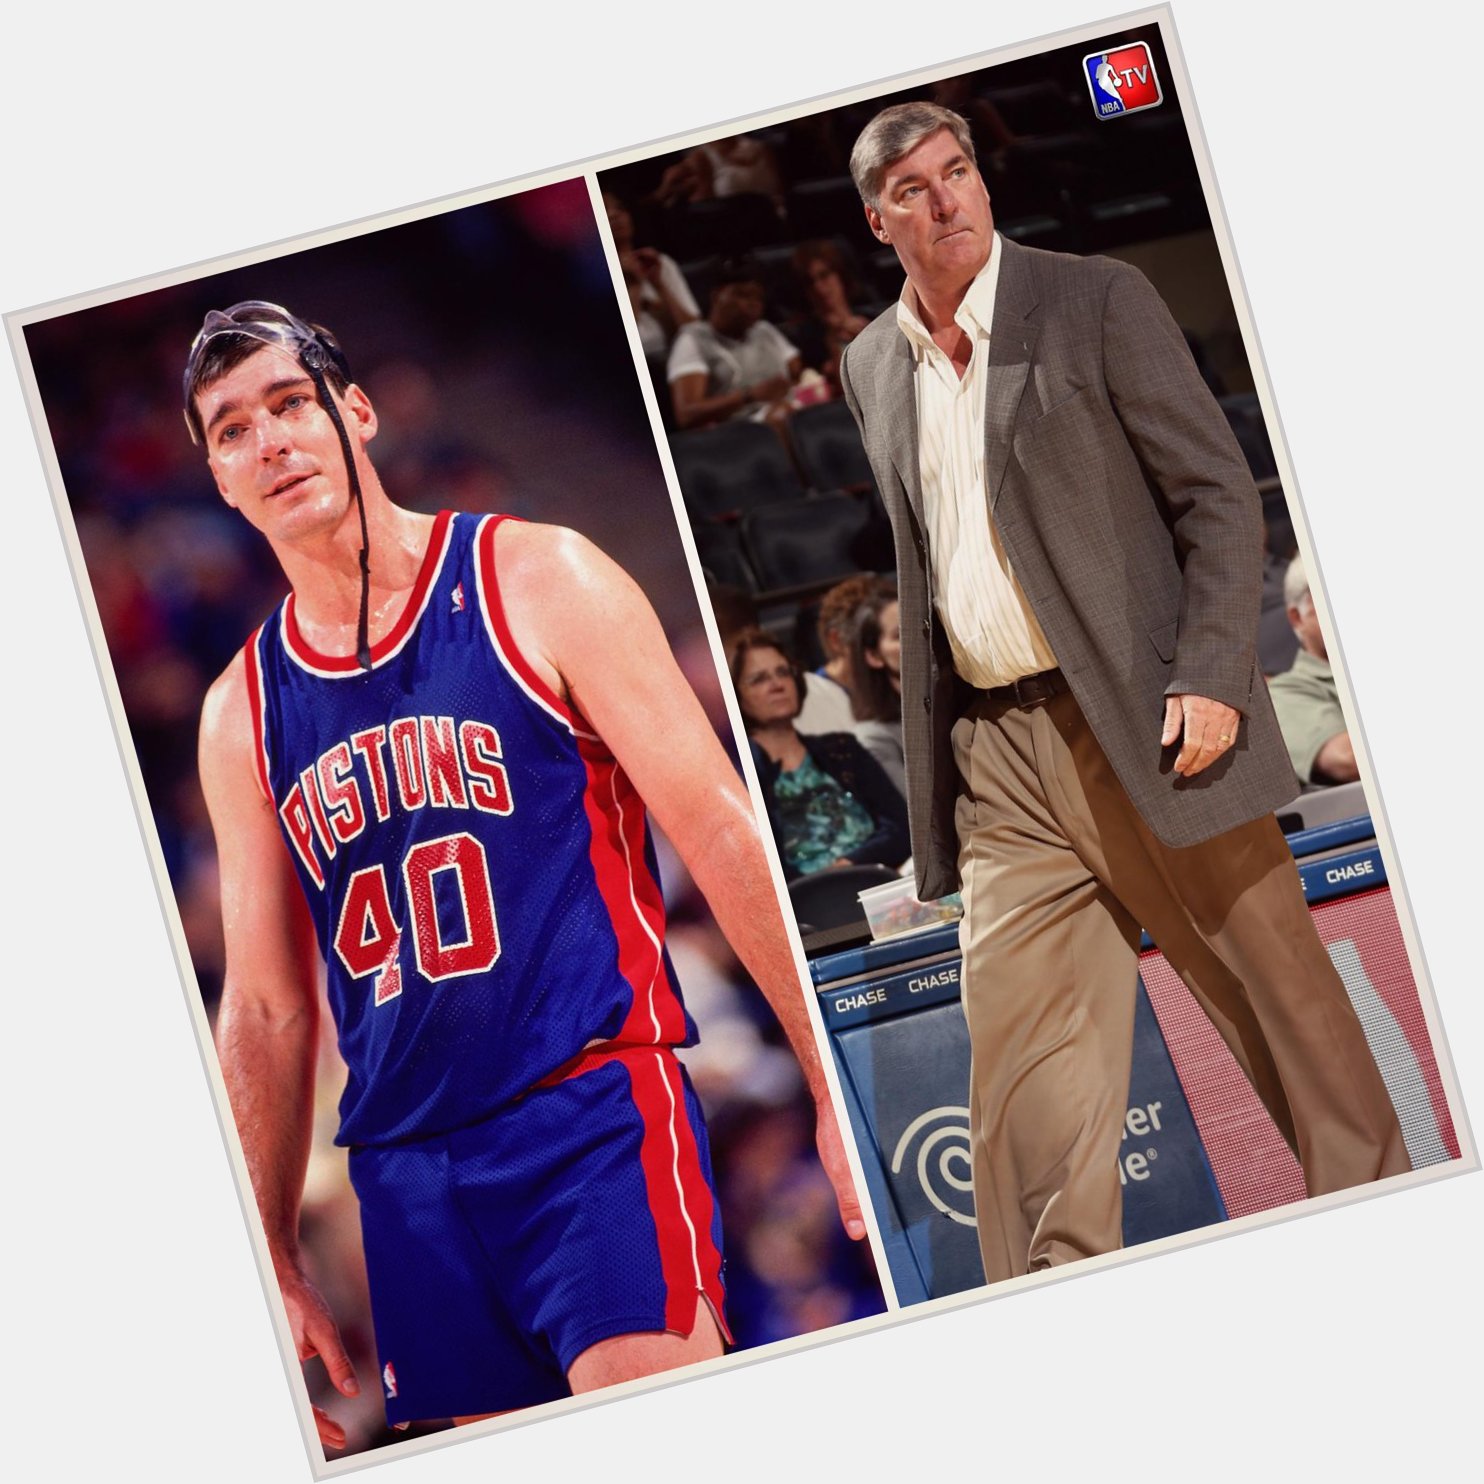 Happy Birthday to 2-time Champion Bill Laimbeer! 